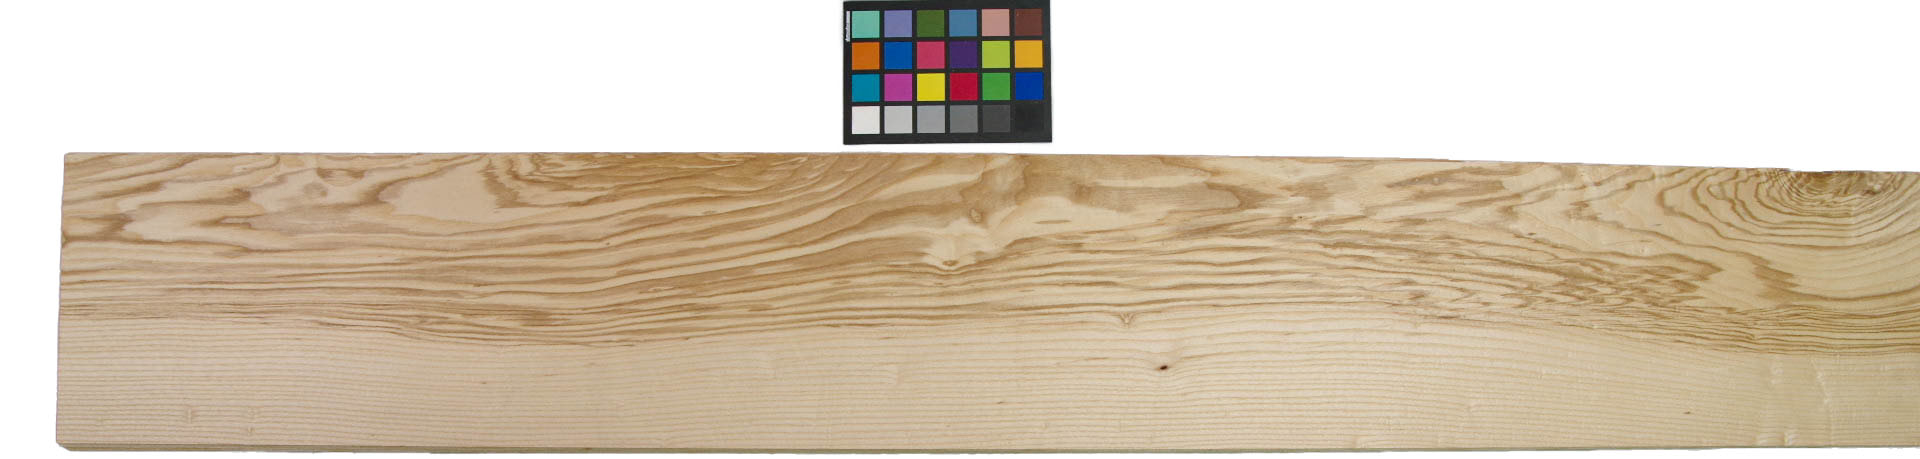 Olive Ash, veneer with Colour reference card